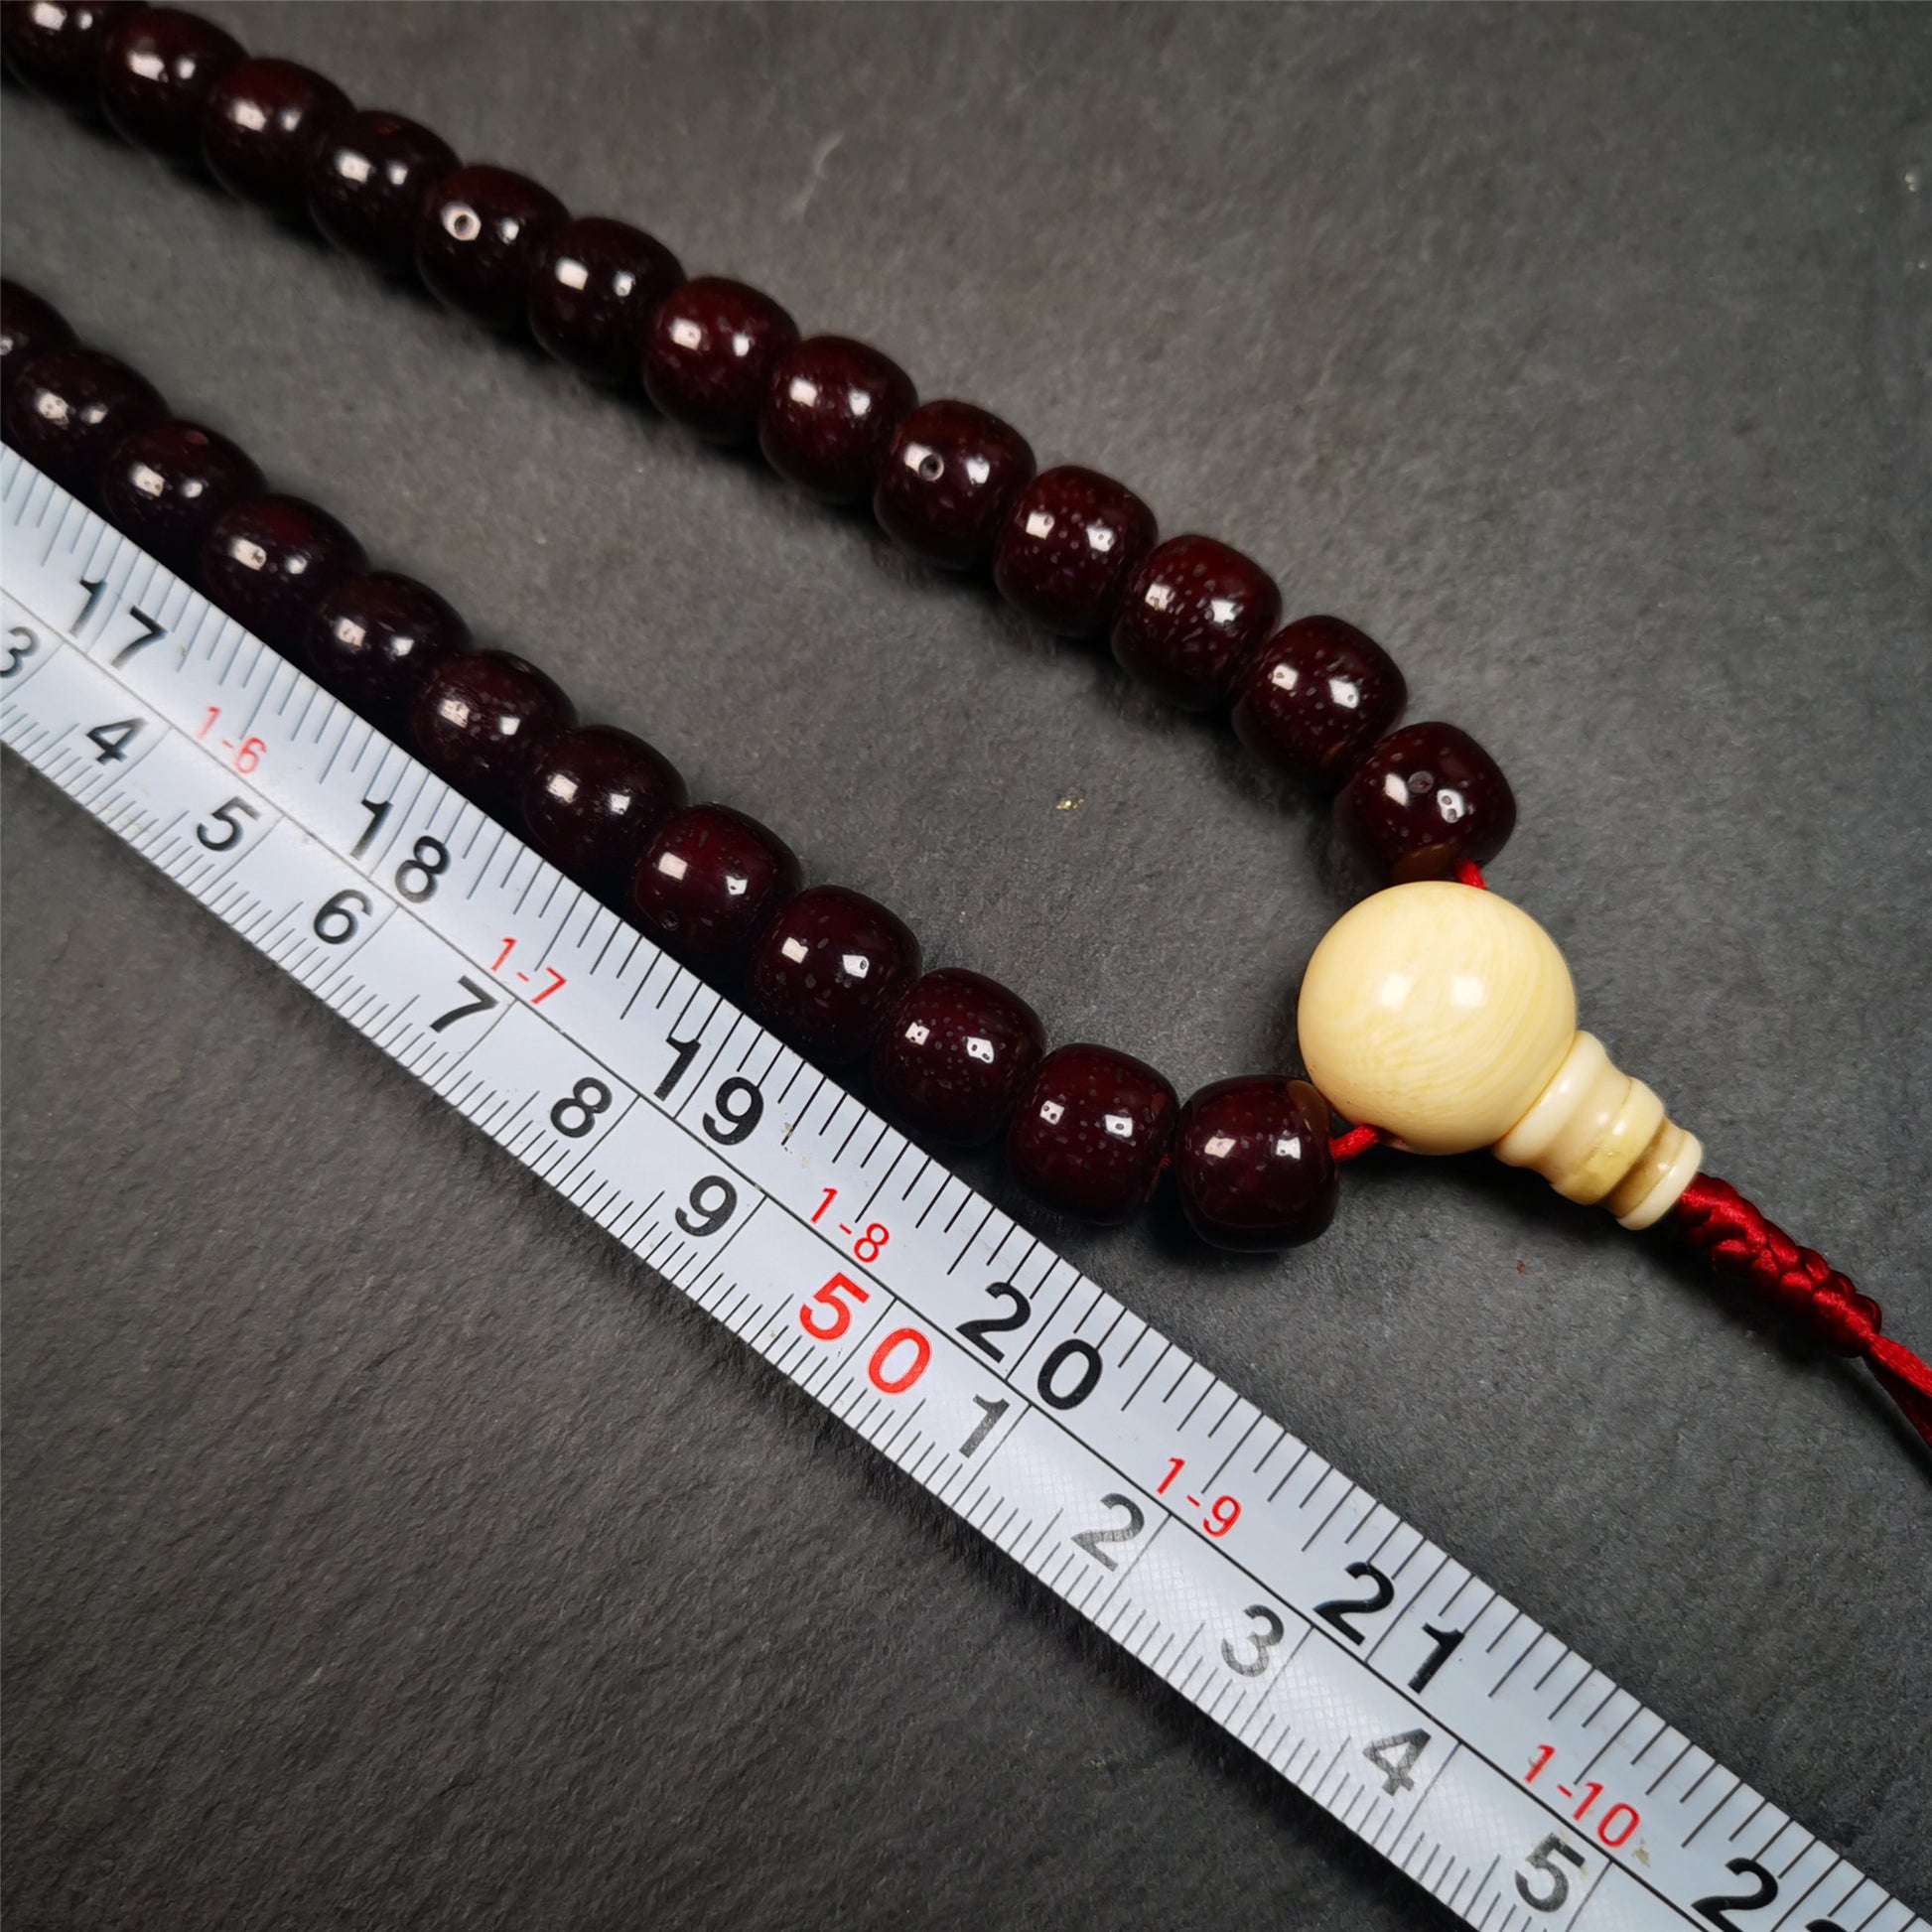 This mala is made by Tibetan craftsmen and come from Hepo Town, Baiyu County,Tibet, the birthplace of the famous Tibetan handicrafts. It's composed of 108 pcs 10mm lotus seed beads,with agate and turquoise beads.